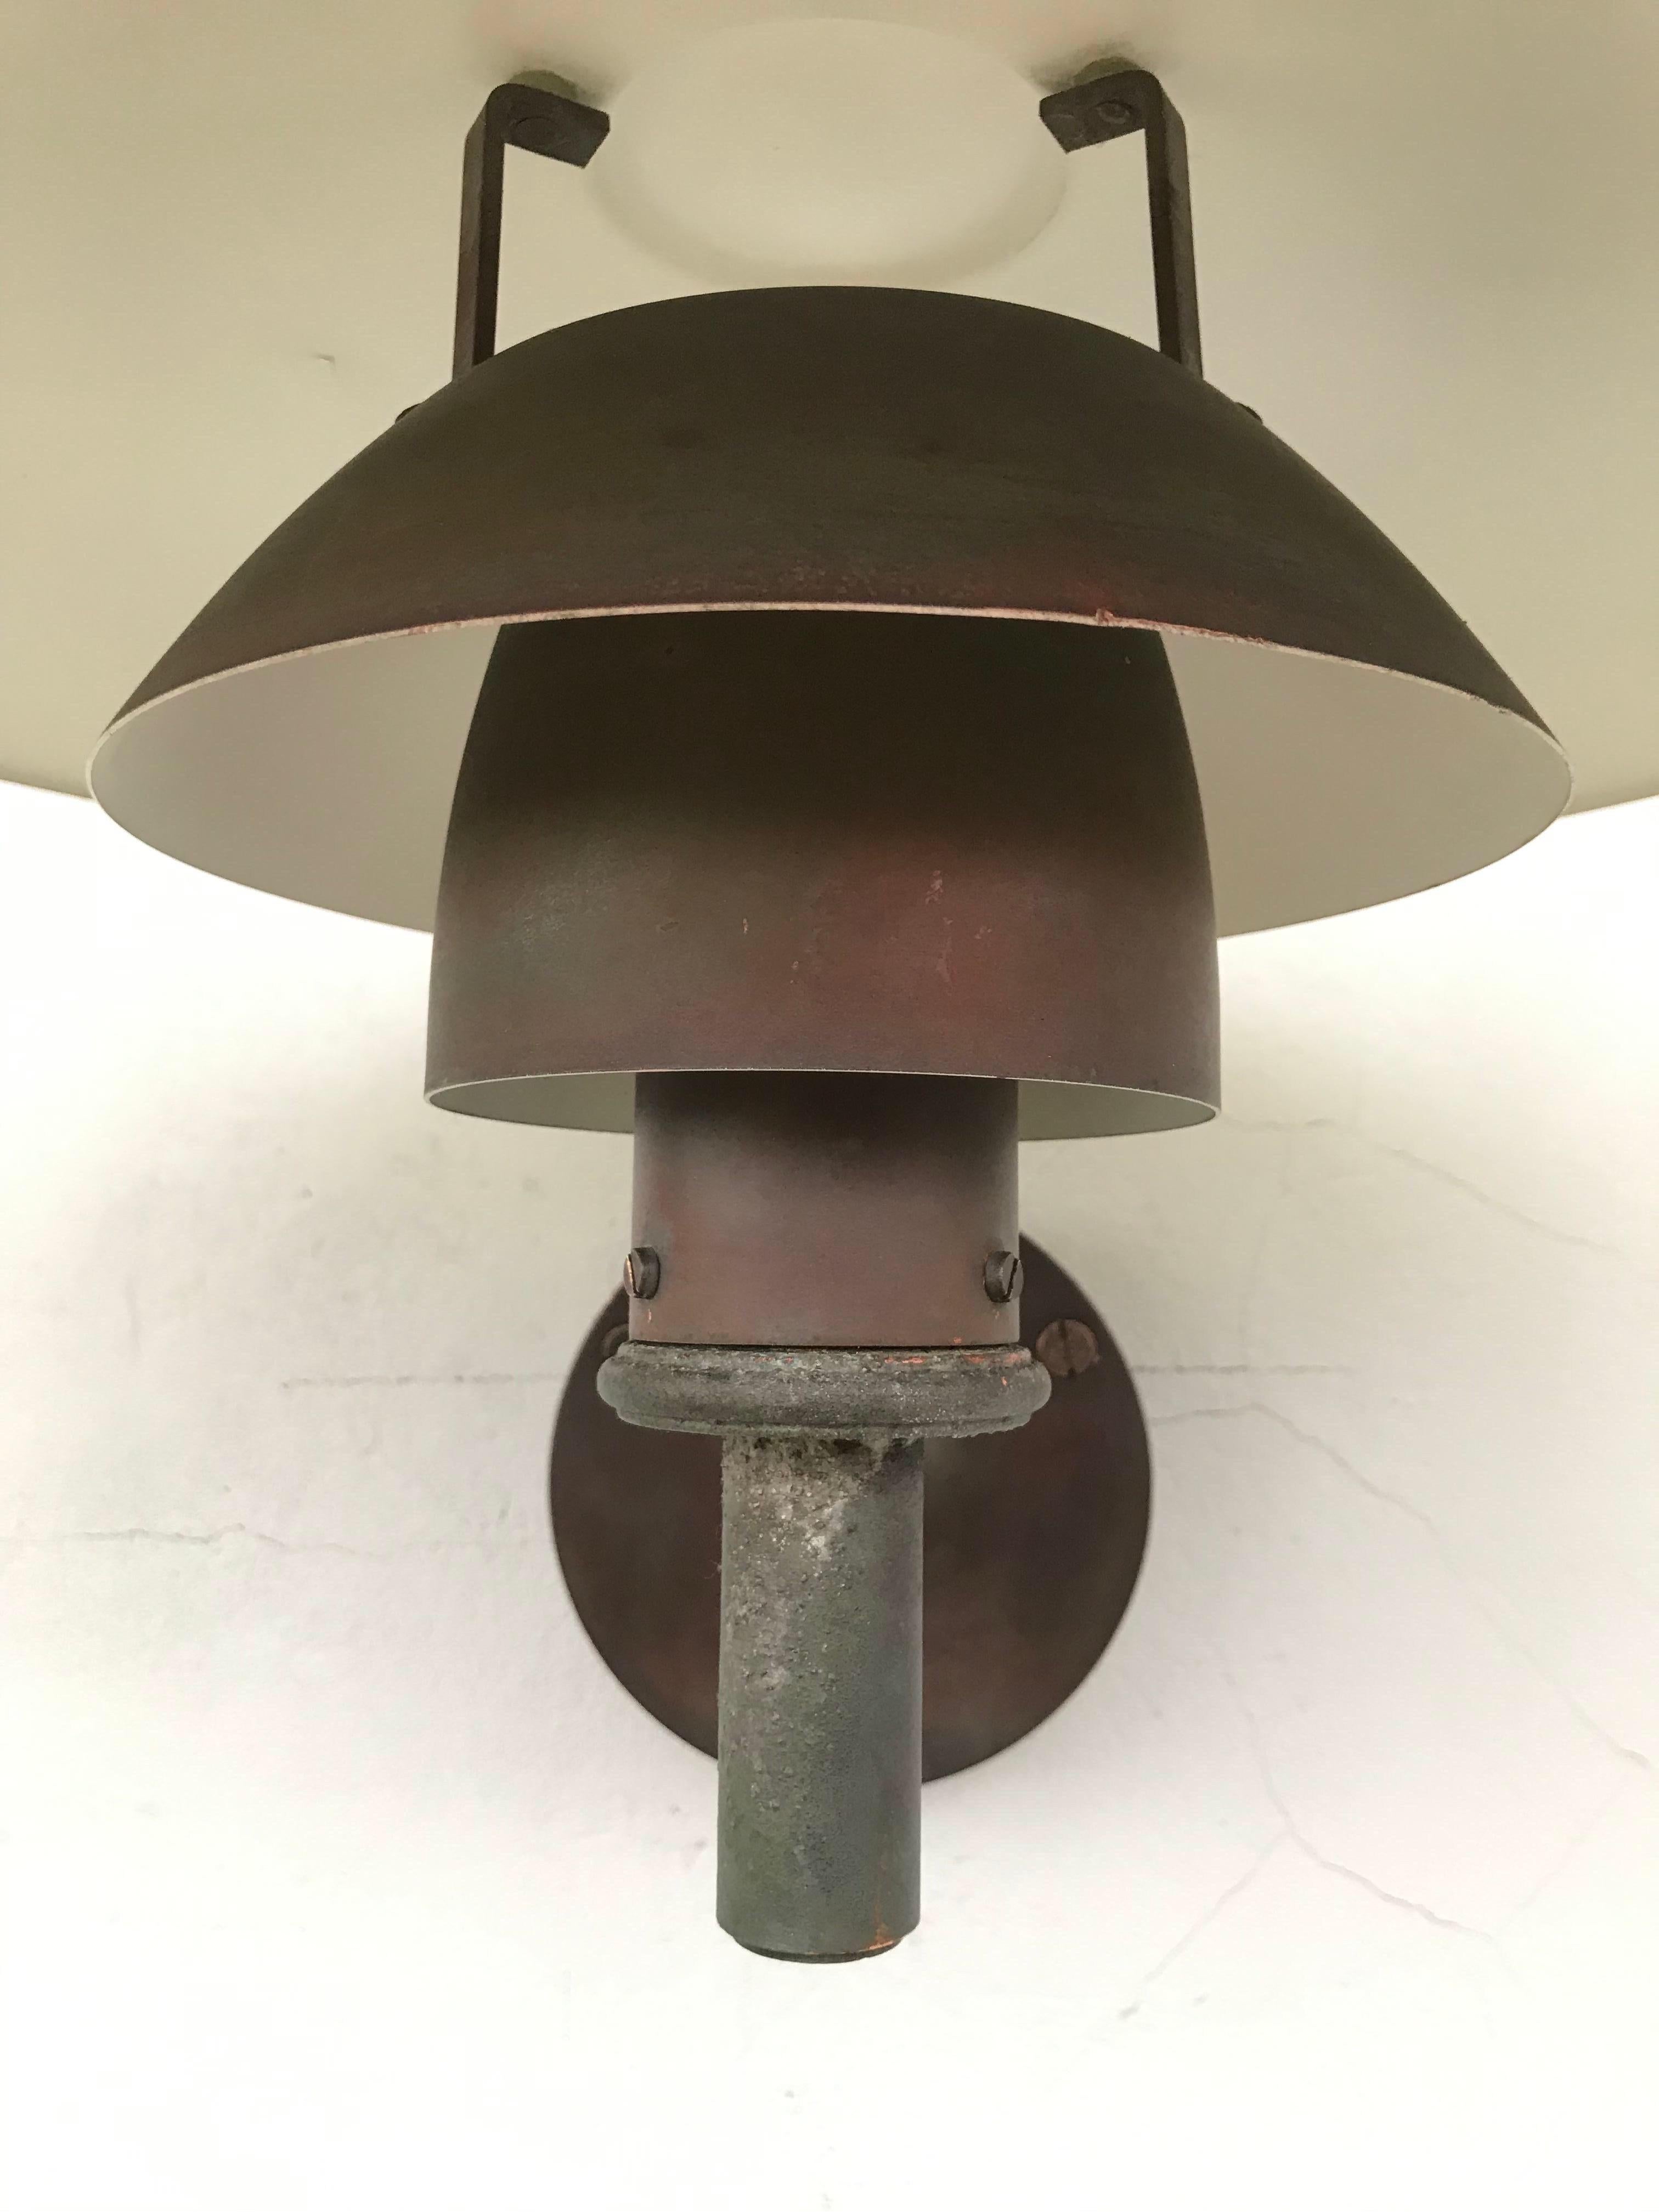 Pair of iconic Vintage Poul Henningsen Copper Wall Lamps by Louis Poulsen of DK 3